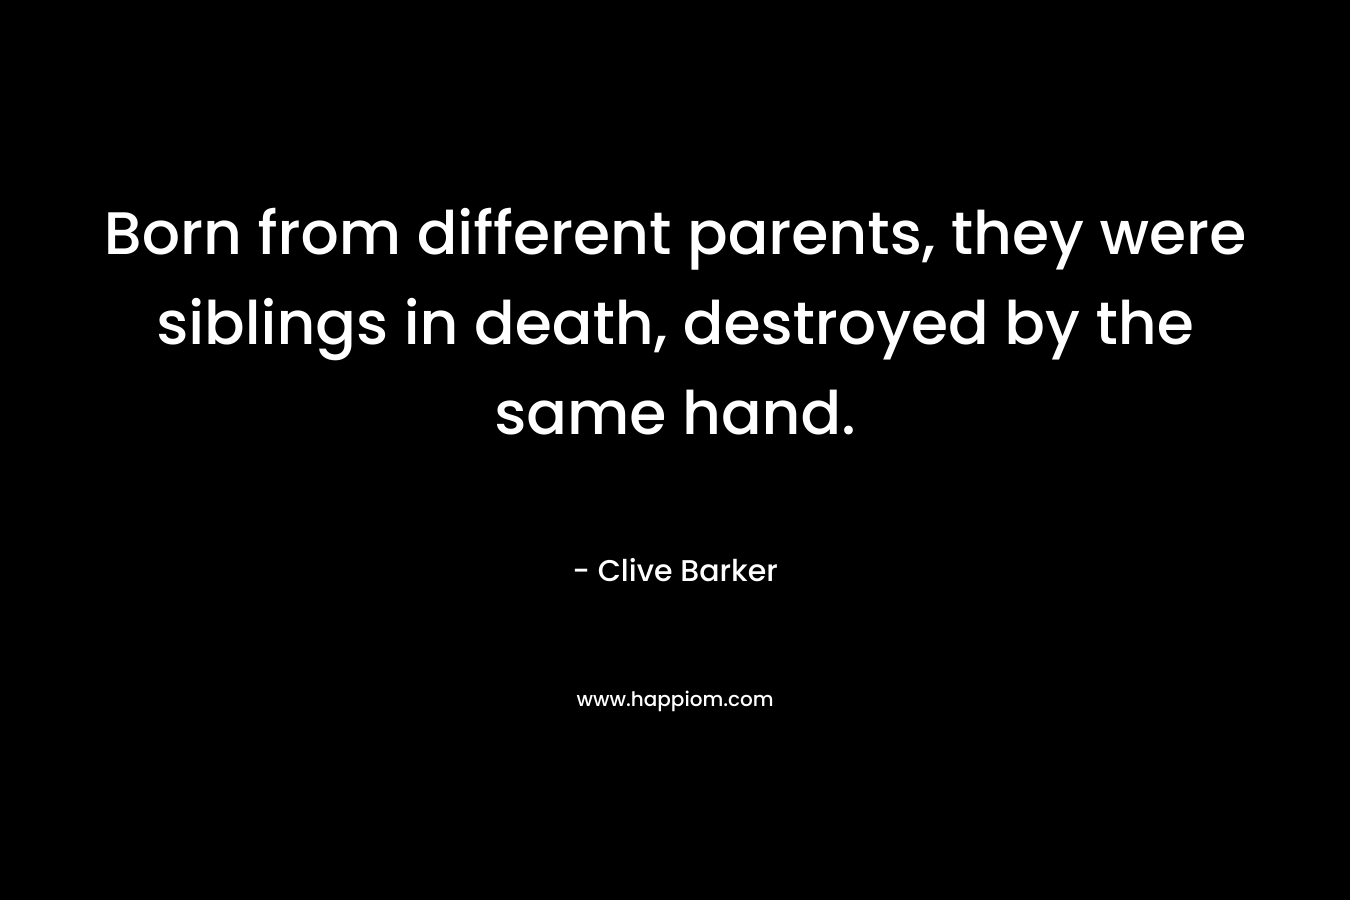 Born from different parents, they were siblings in death, destroyed by the same hand. – Clive Barker